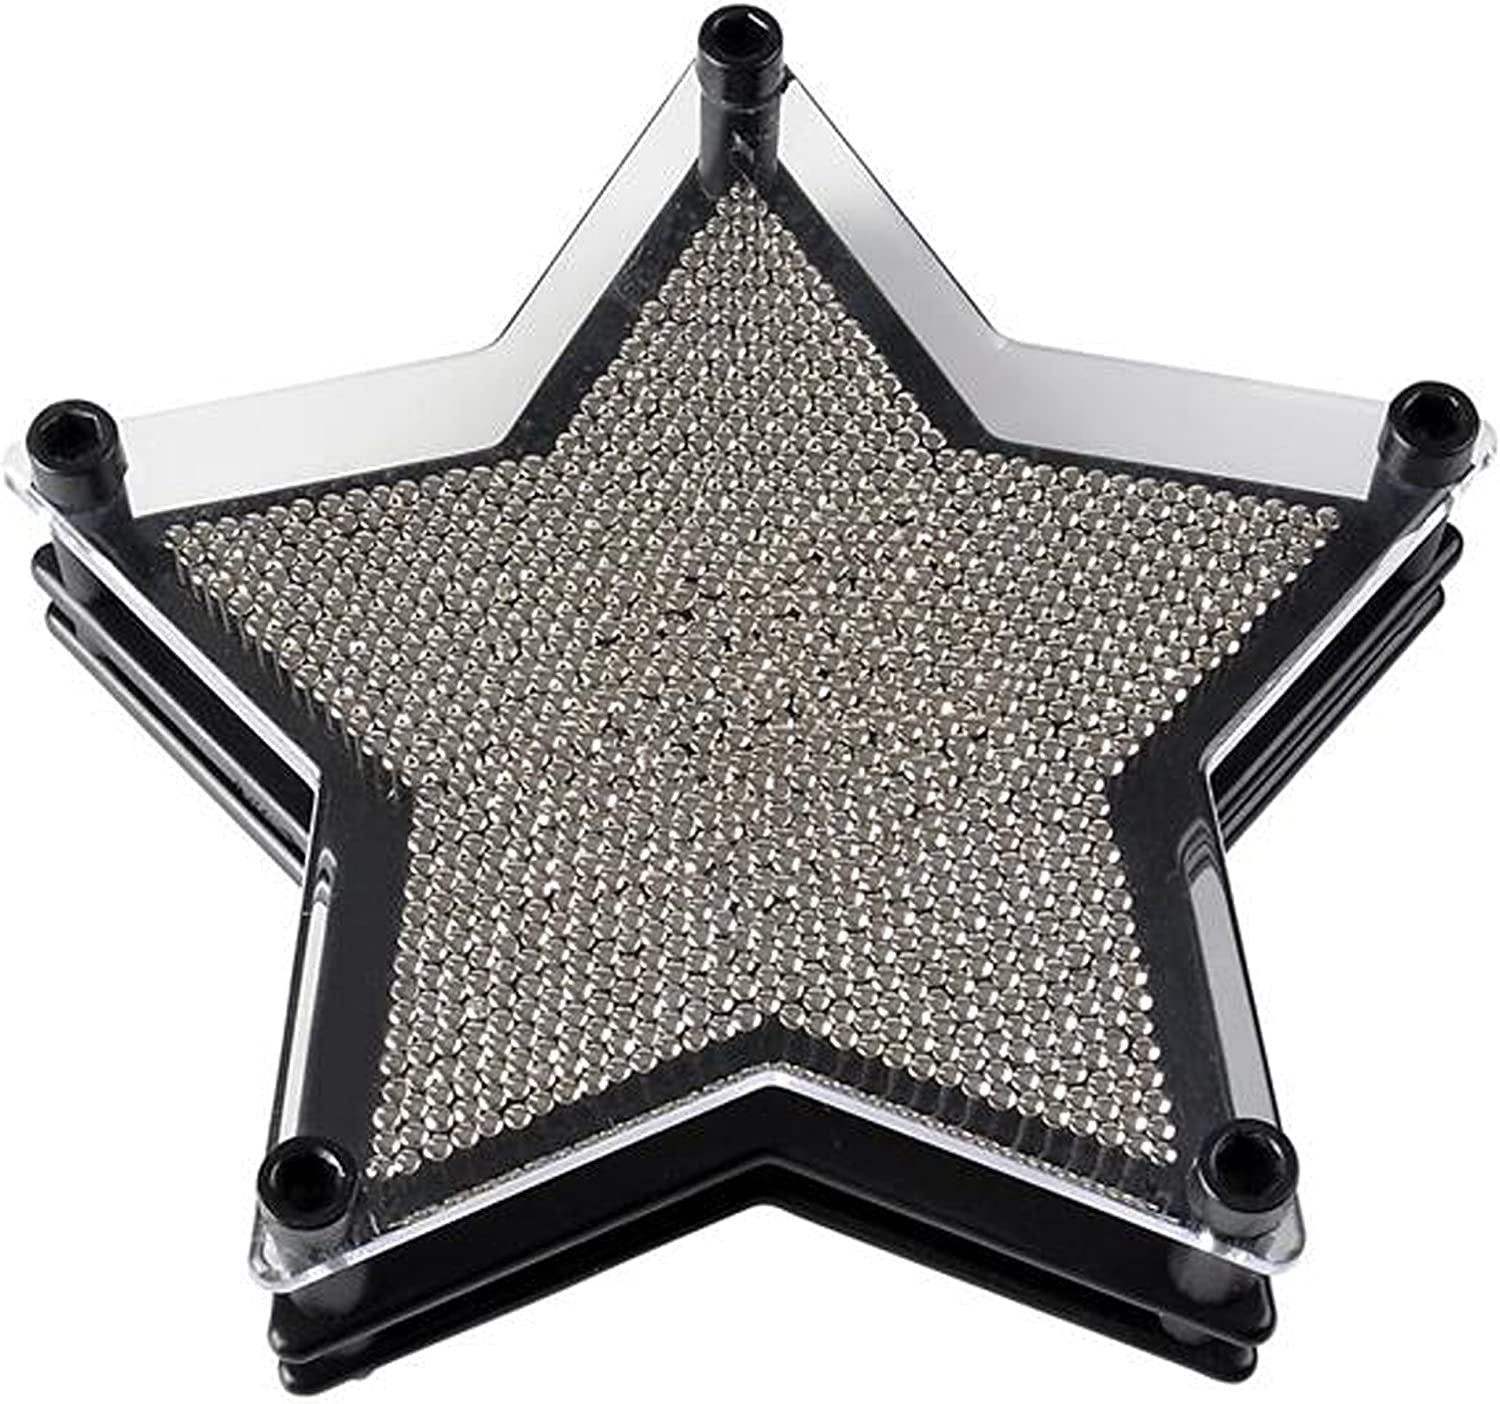 6" Star Pin Art Game for Kids-Adults Pin Art Toy for Autistic Kids-Stainless Steel Metal Pins, Sturdy Plastic Frame-Great Party Favor, Gift for Boys-Girls, Office Desk Decoration